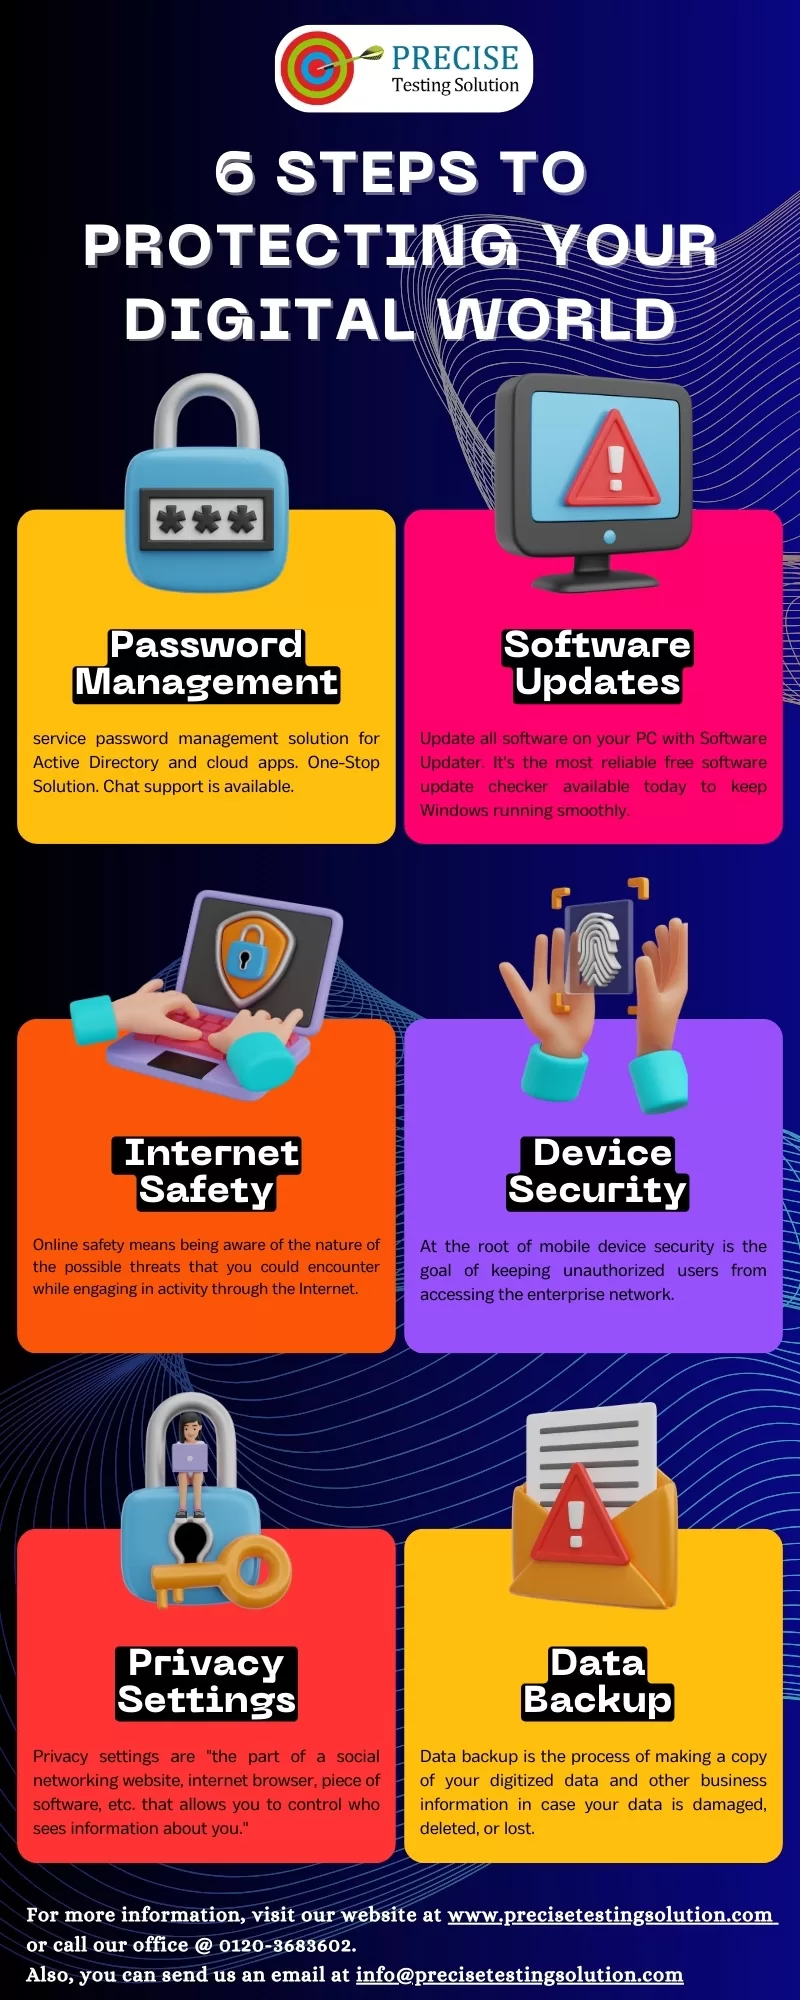 6 Steps to Protecting Your Digital World